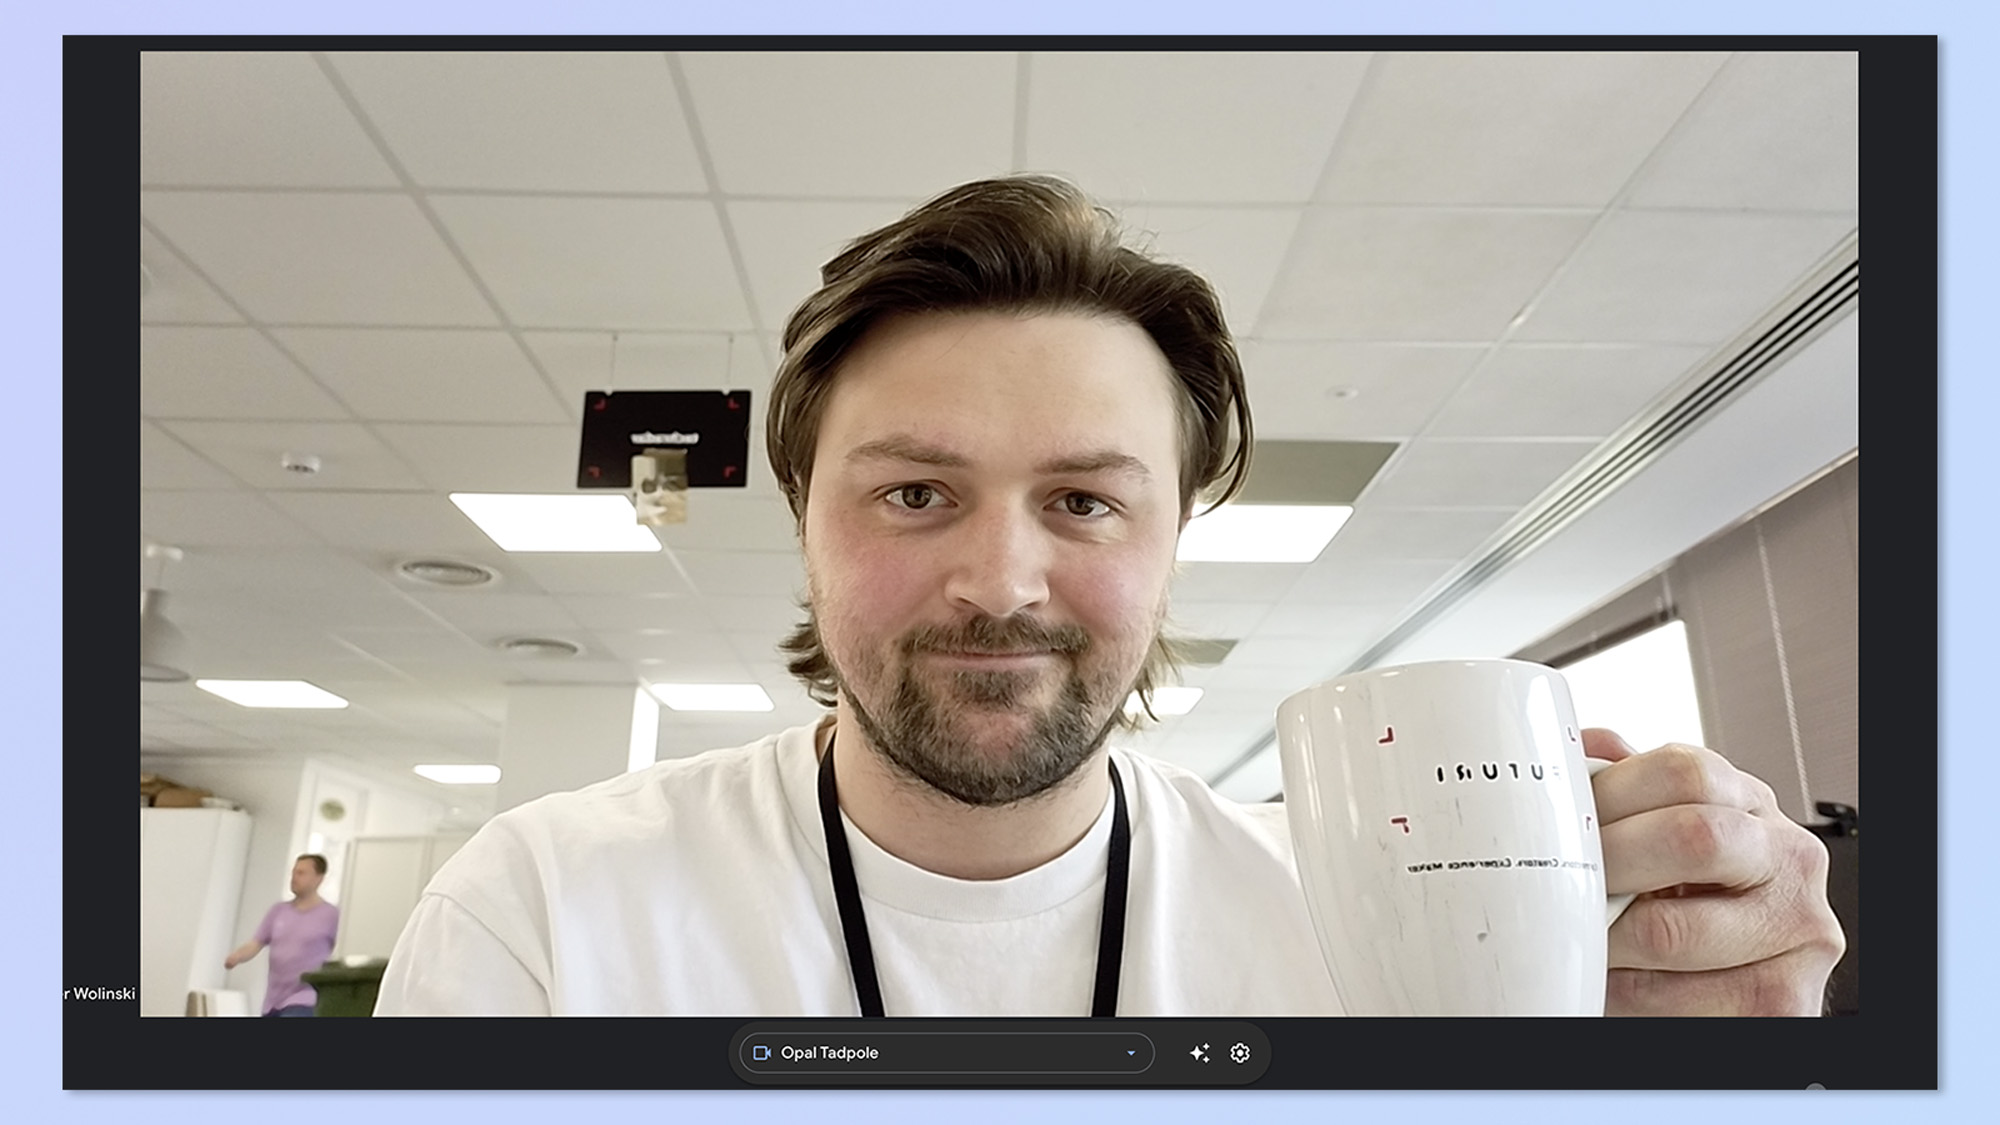 A screenshot of author Peter Wolinski, holding up a mug while on a video call. This screenshot shows the image of the Opal Tadpole webcam.